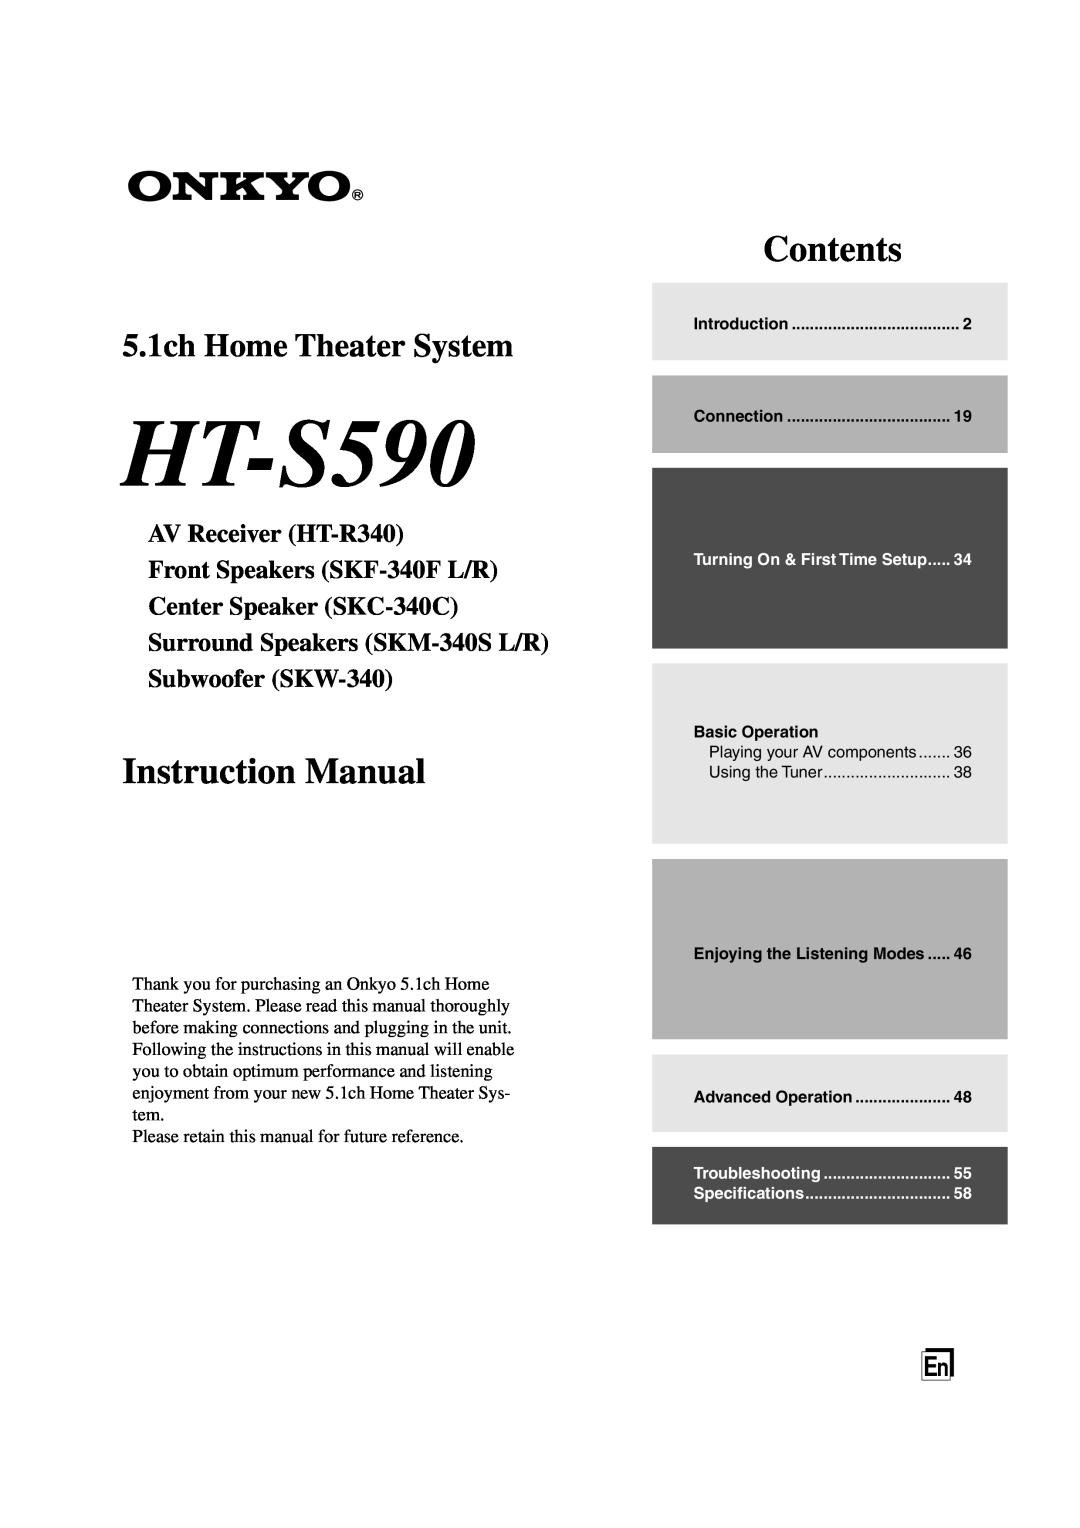 Onkyo HT-S590 instruction manual Contents, 5.1ch Home Theater System, AV Receiver HT-R340 Front Speakers SKF-340FL/R 